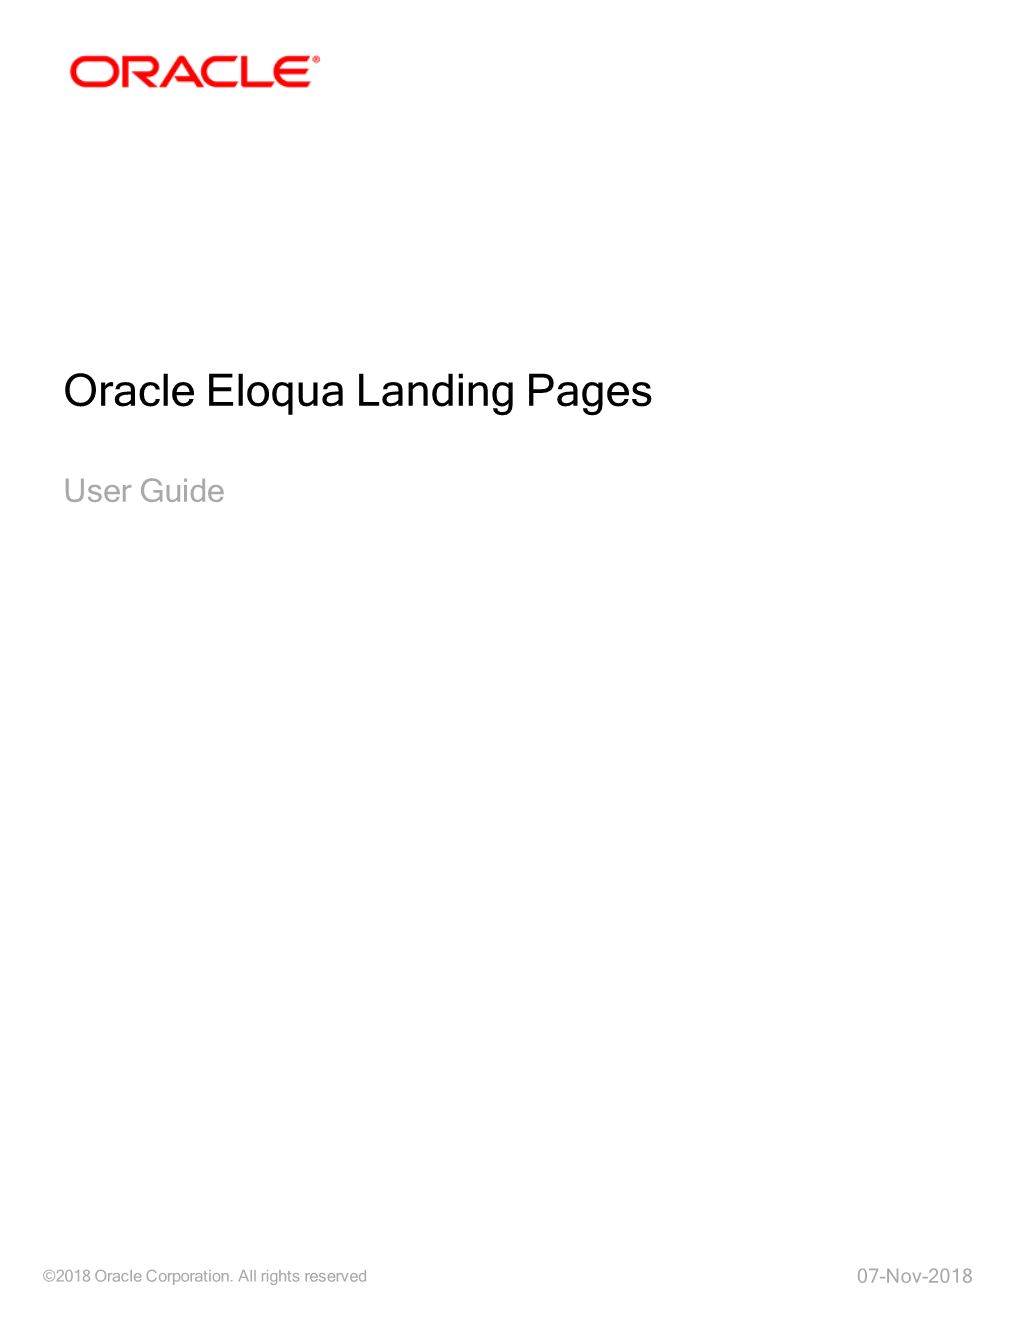 Oracle Eloqua Landing Pages User Guide